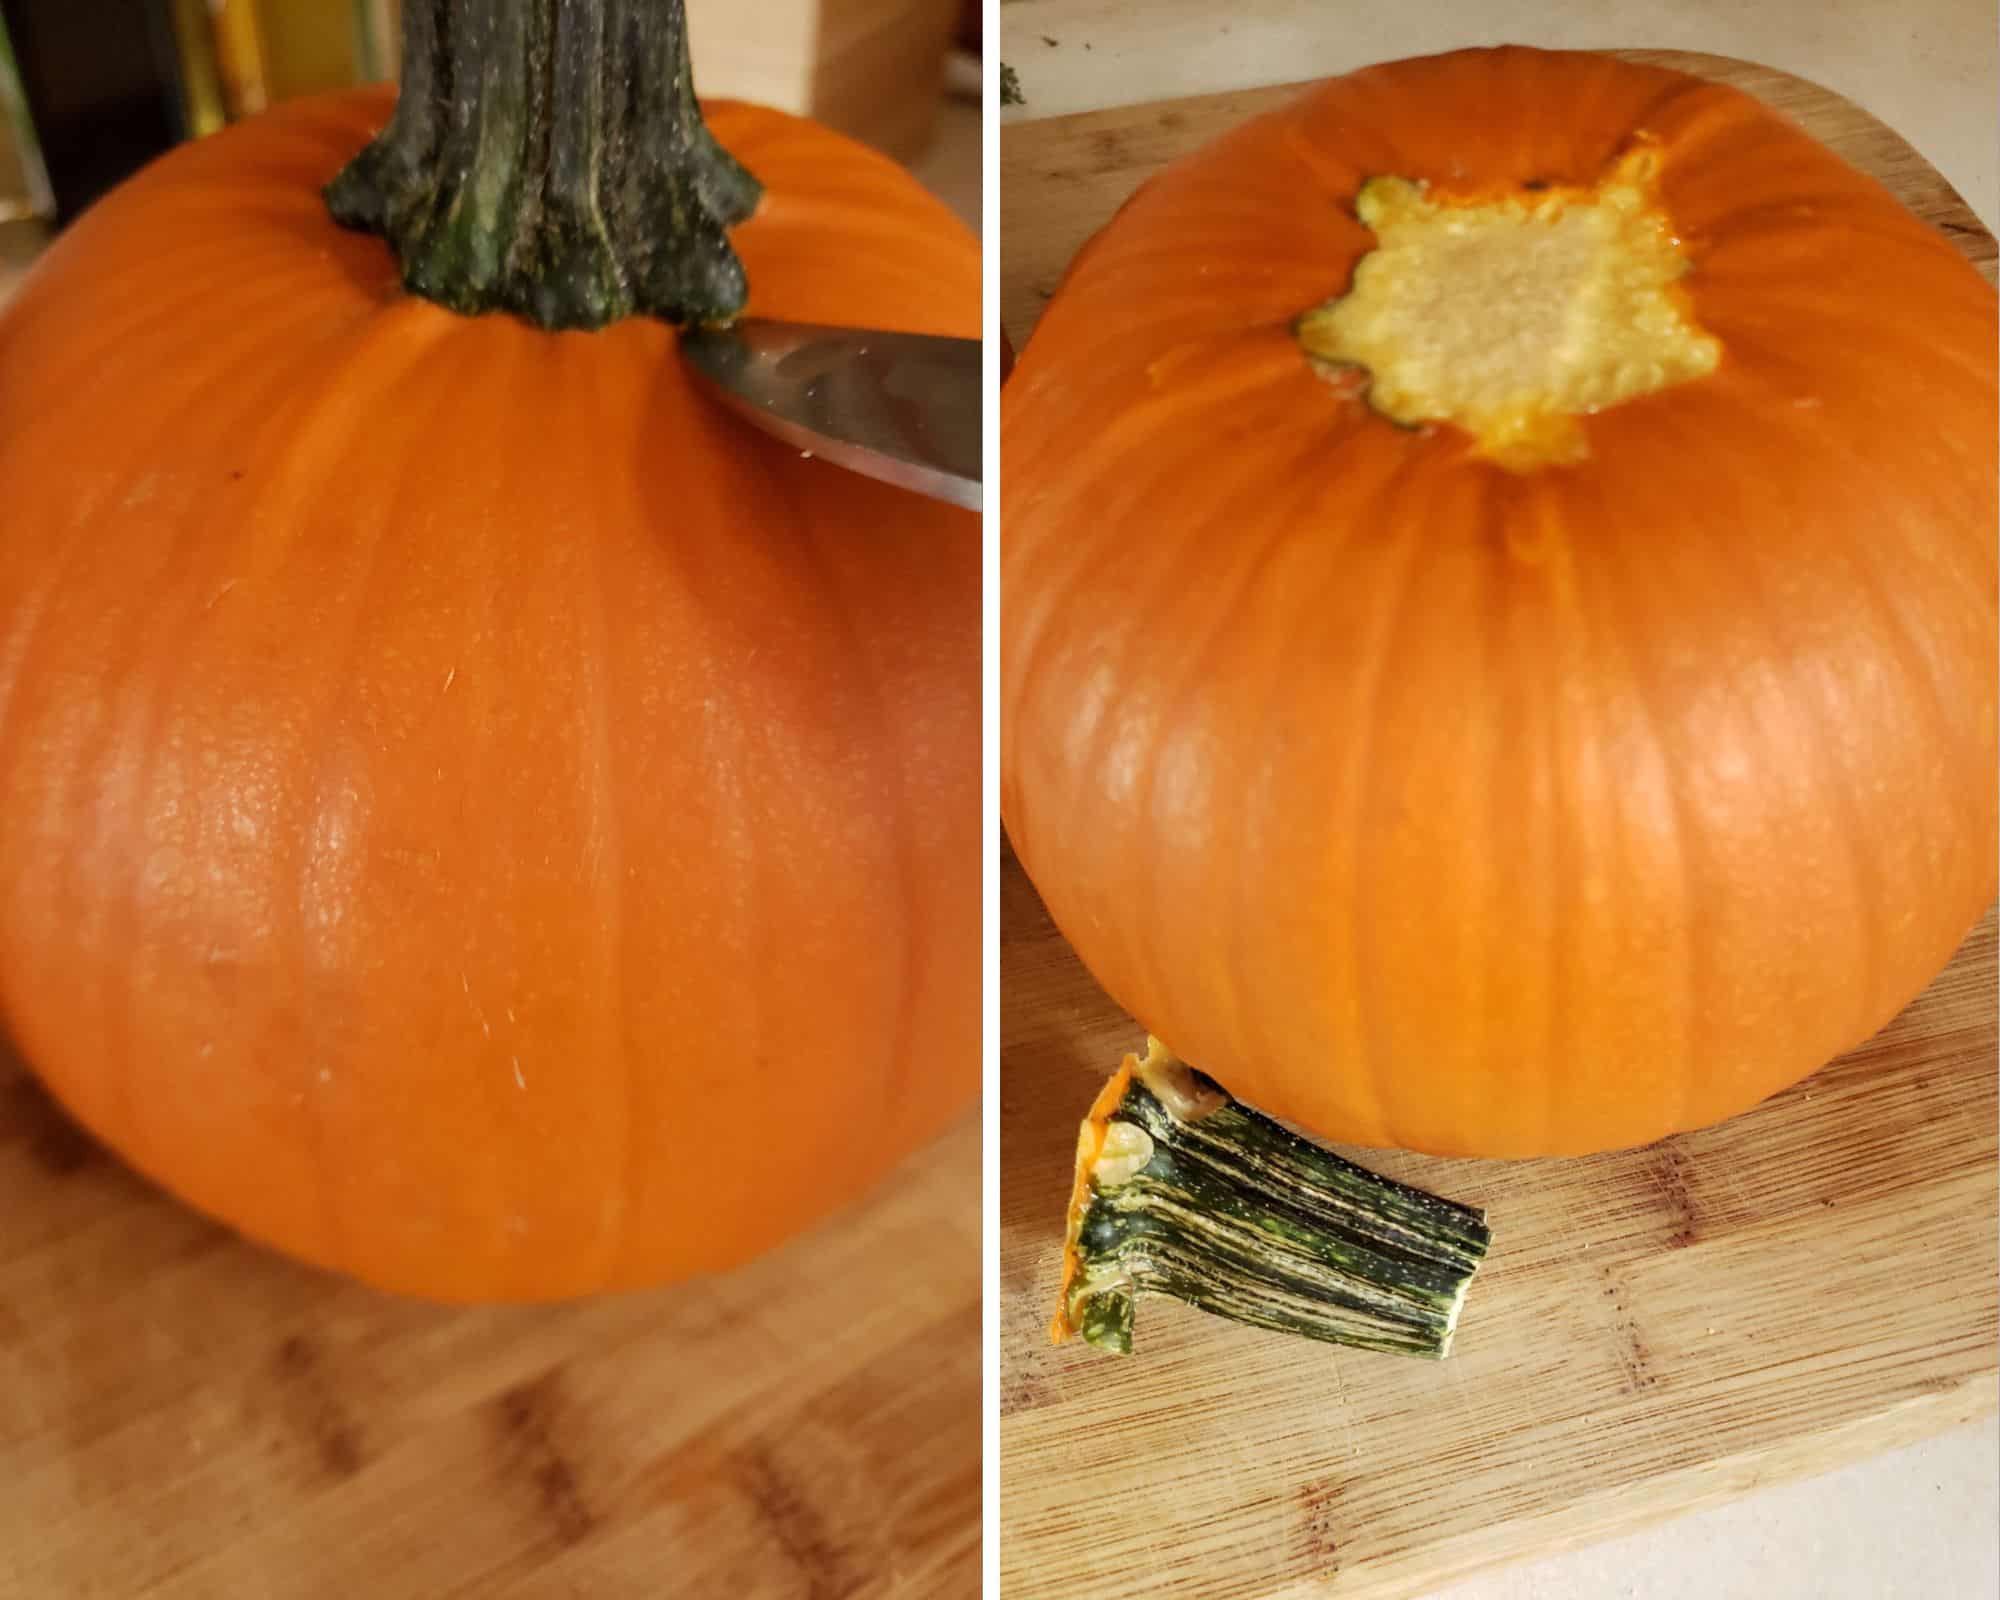 Photos showing how to remove the pumpkin stem.